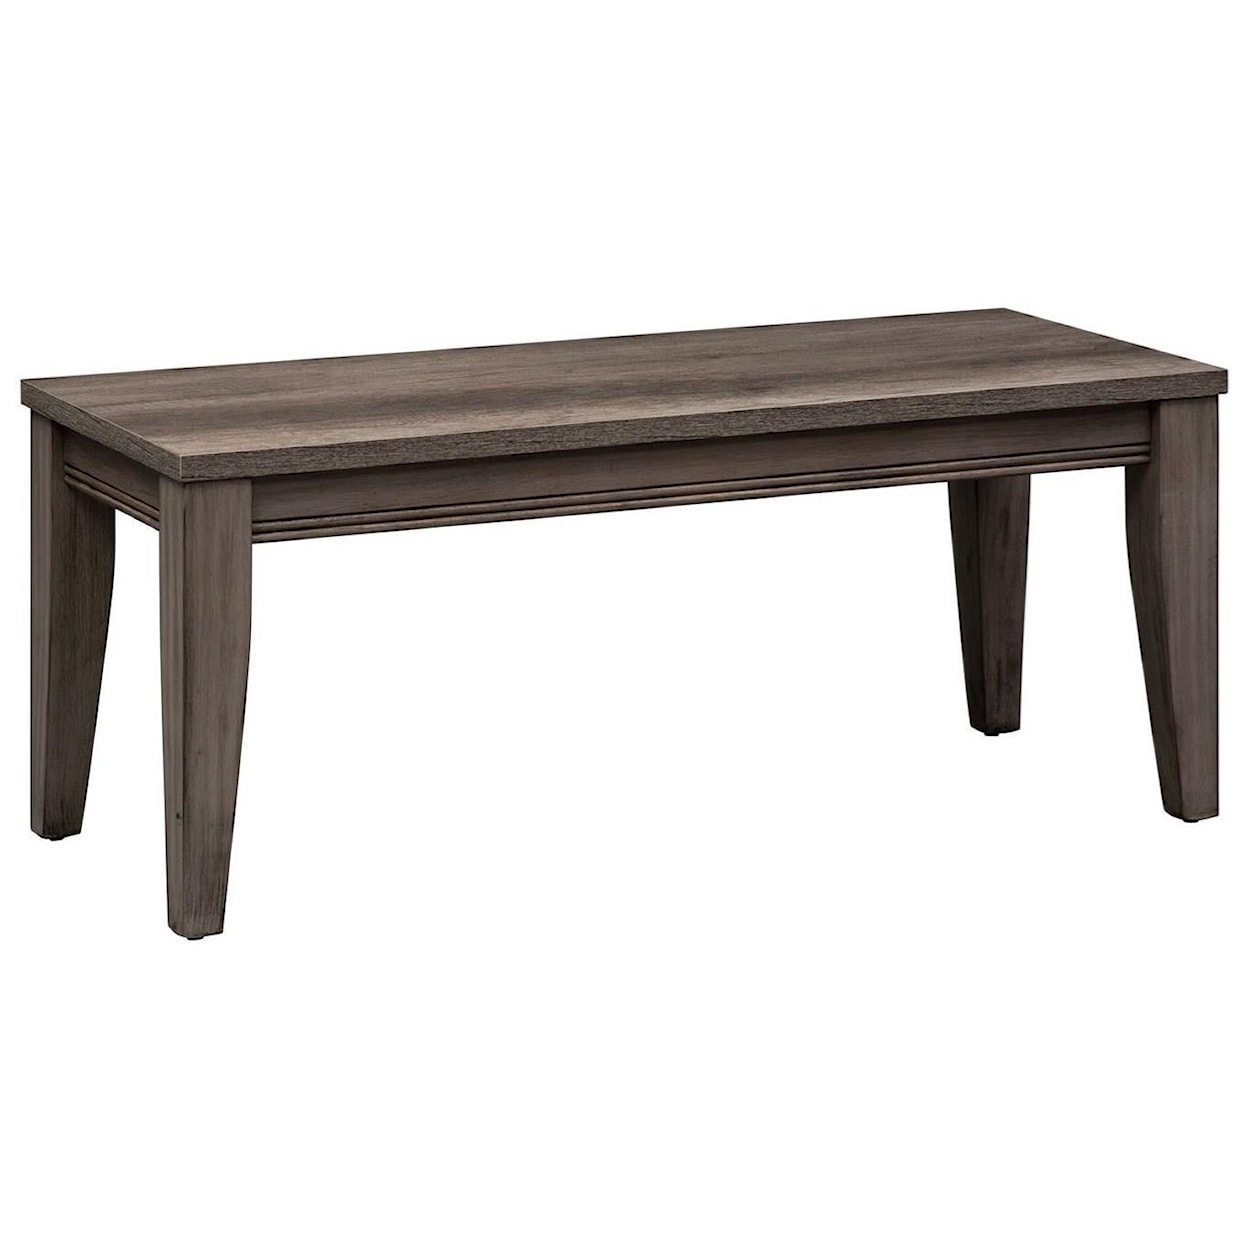 Liberty Furniture Tanners Creek Dining Bench